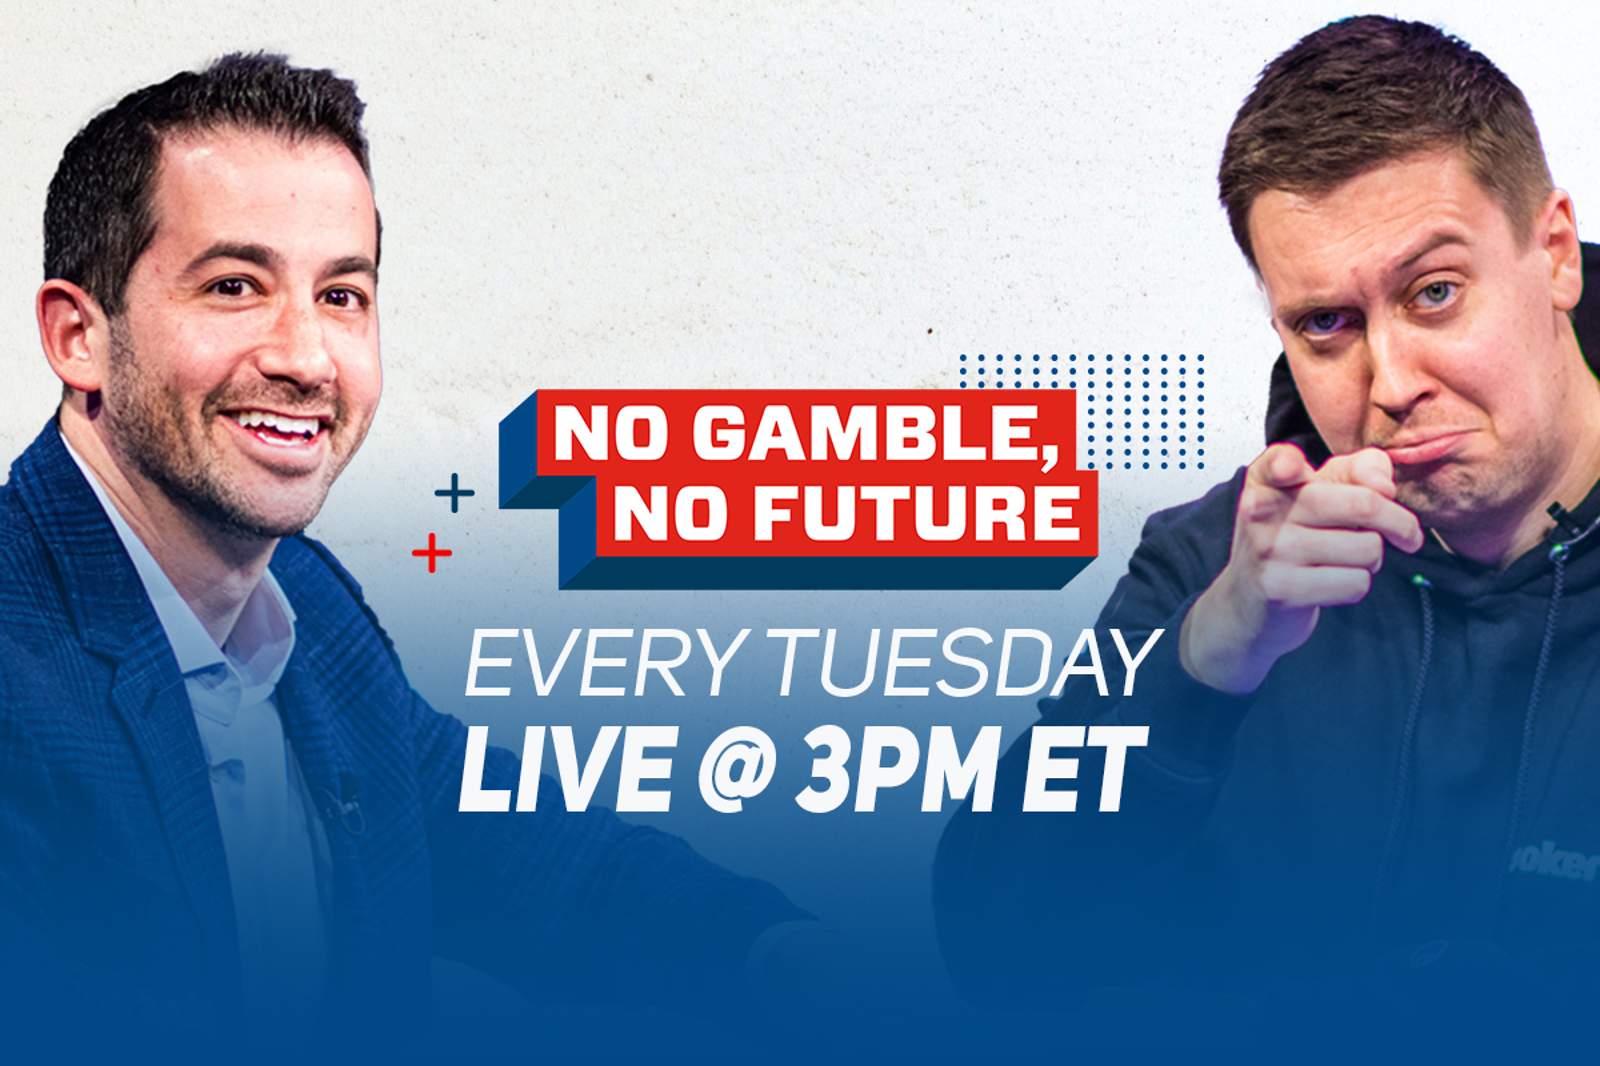 No Gamble, No Future Episode 5 on Today at 3 p.m. ET with Daniel Negreanu